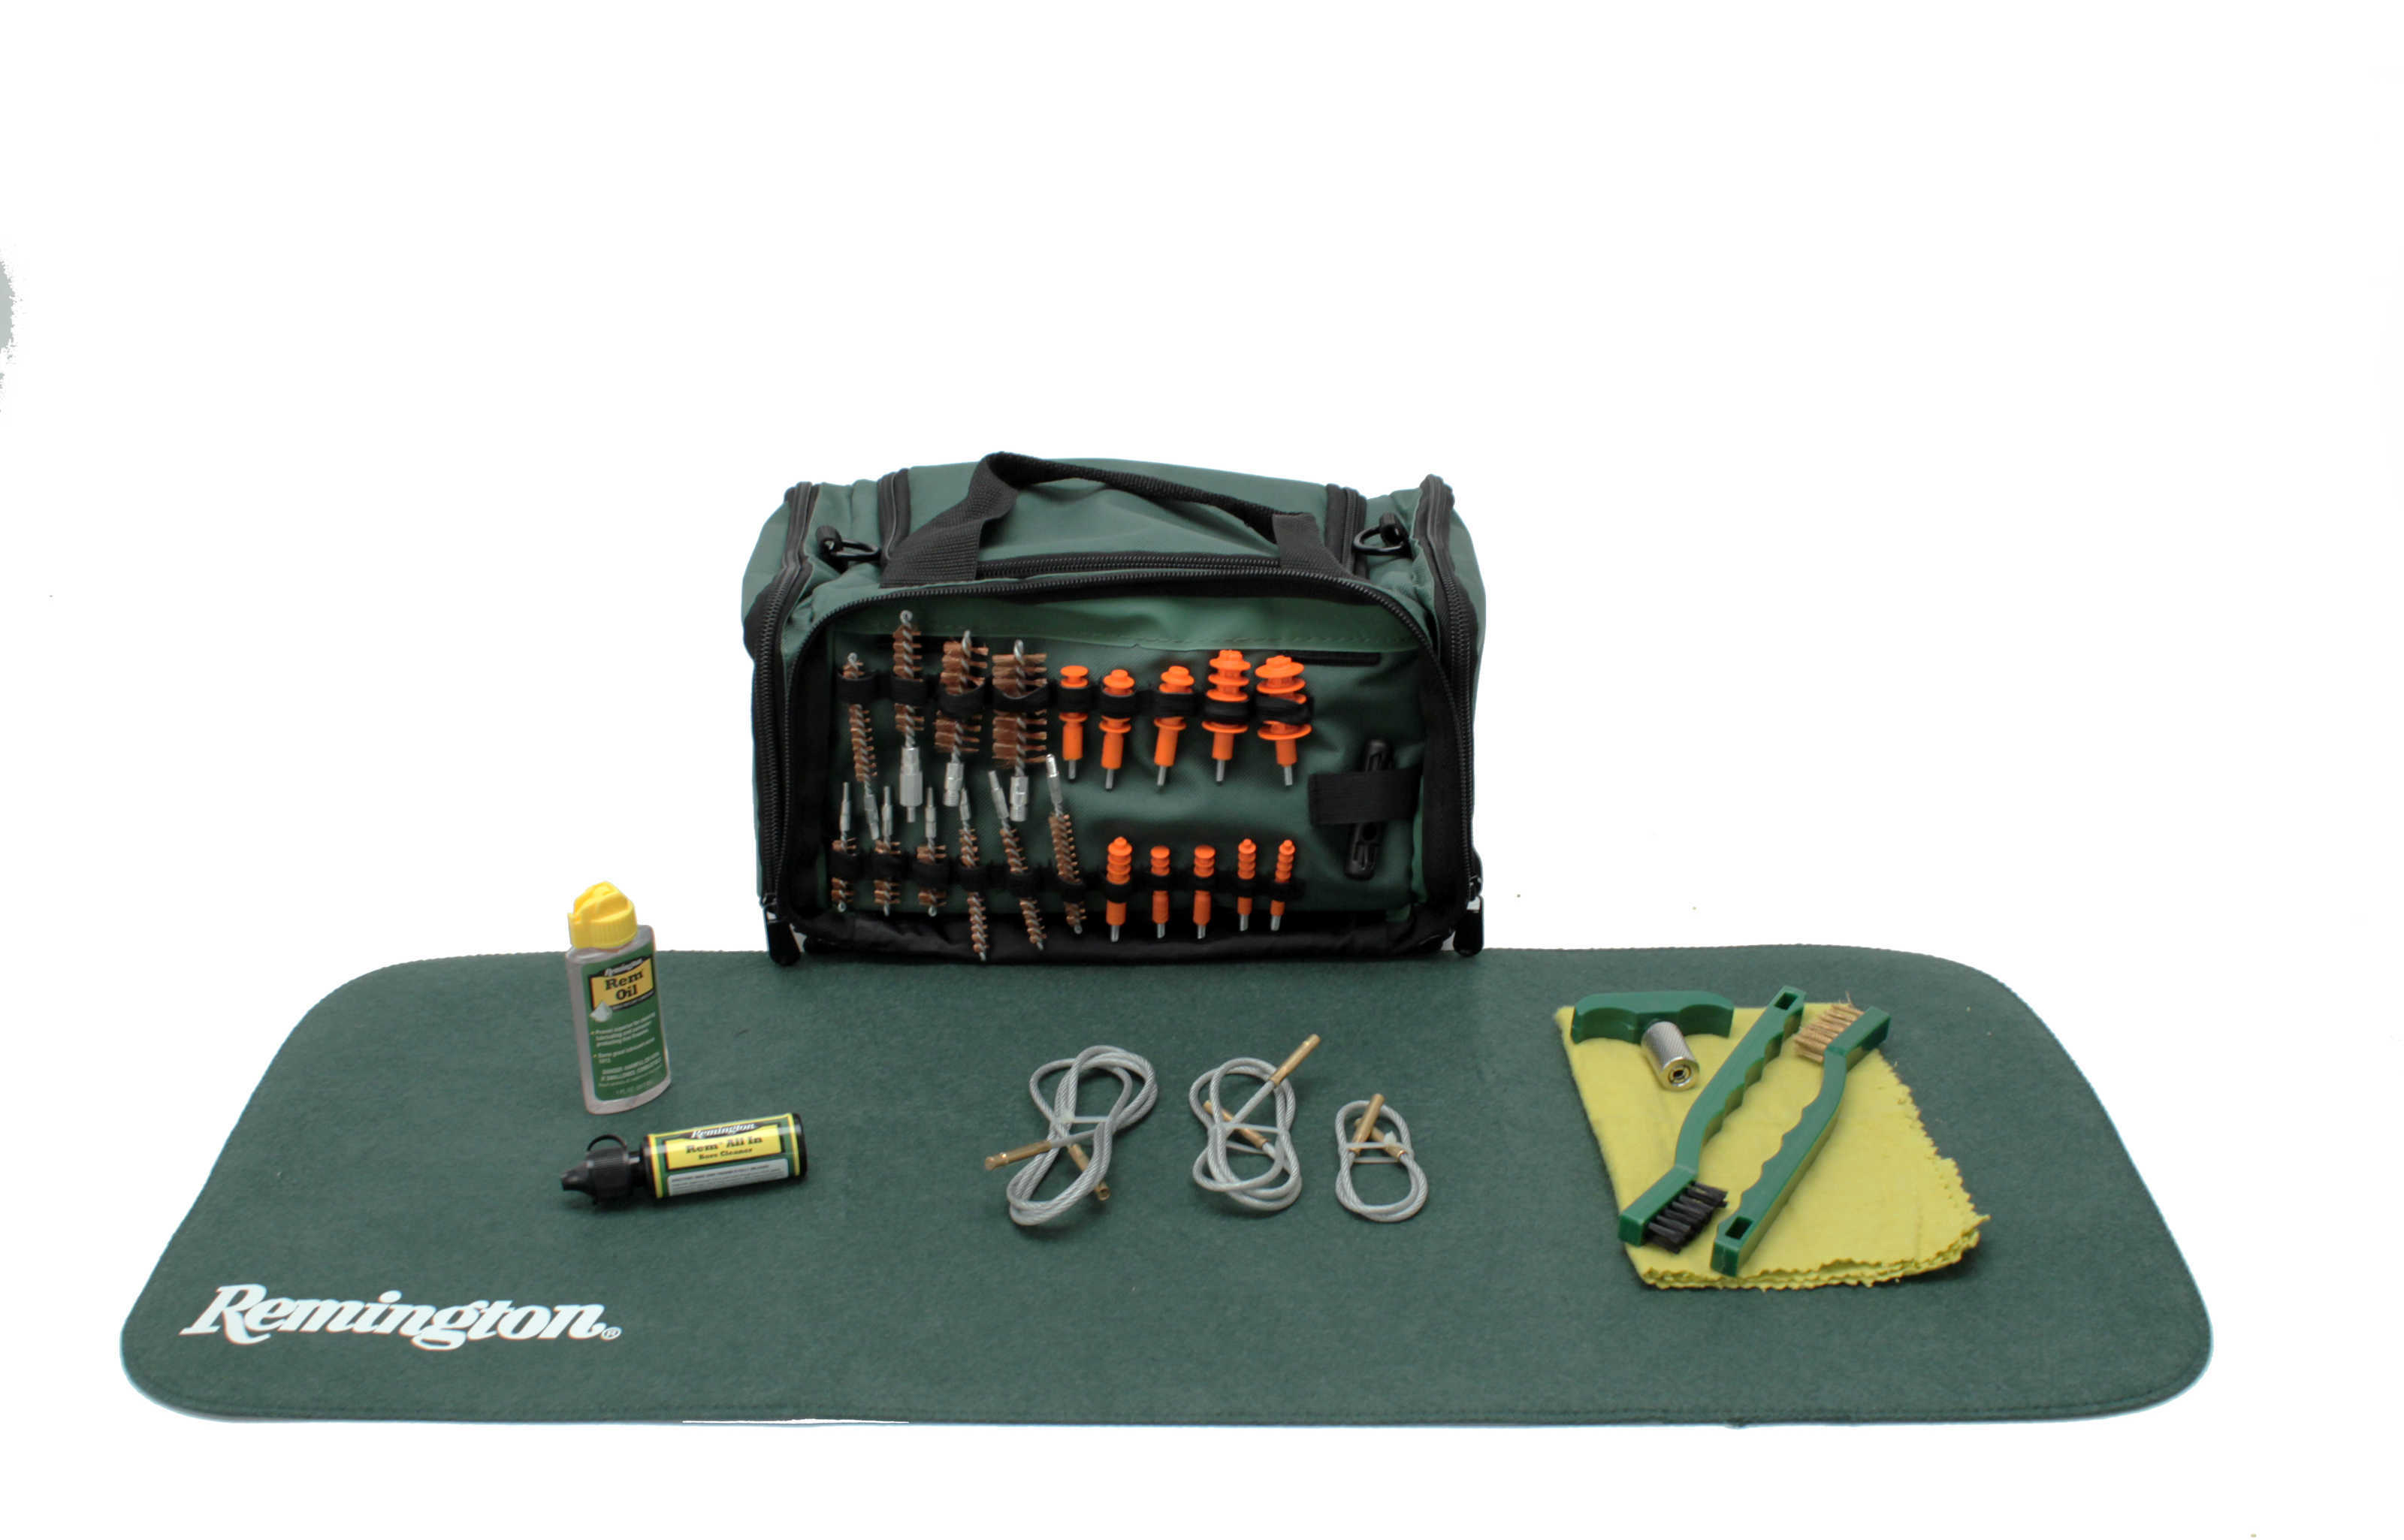 Remington SQUEEG-E Range Bag Kit Cleaning Equipment Outfit